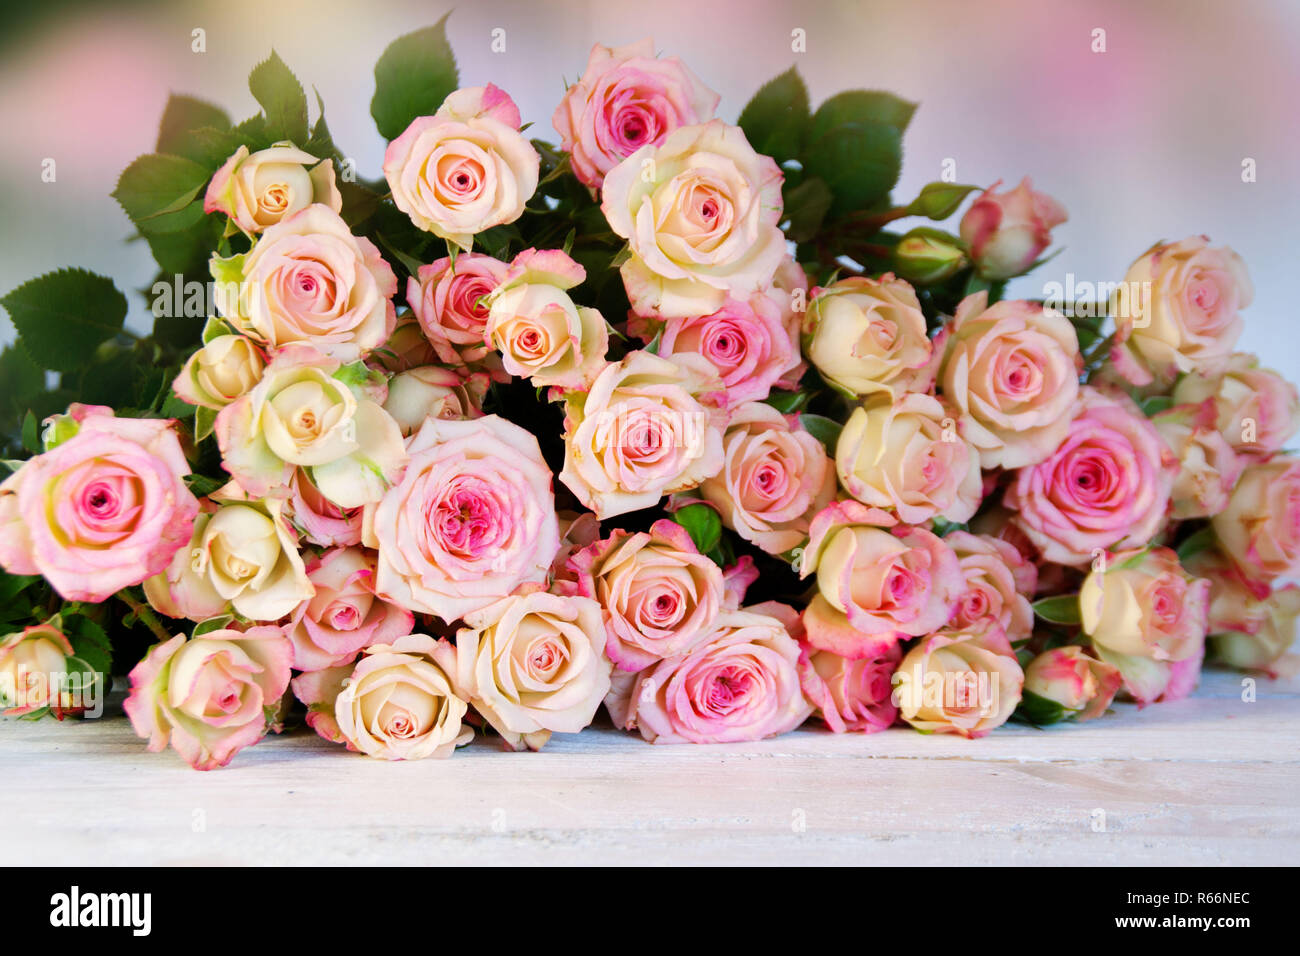 many roses for mothers day Stock Photo